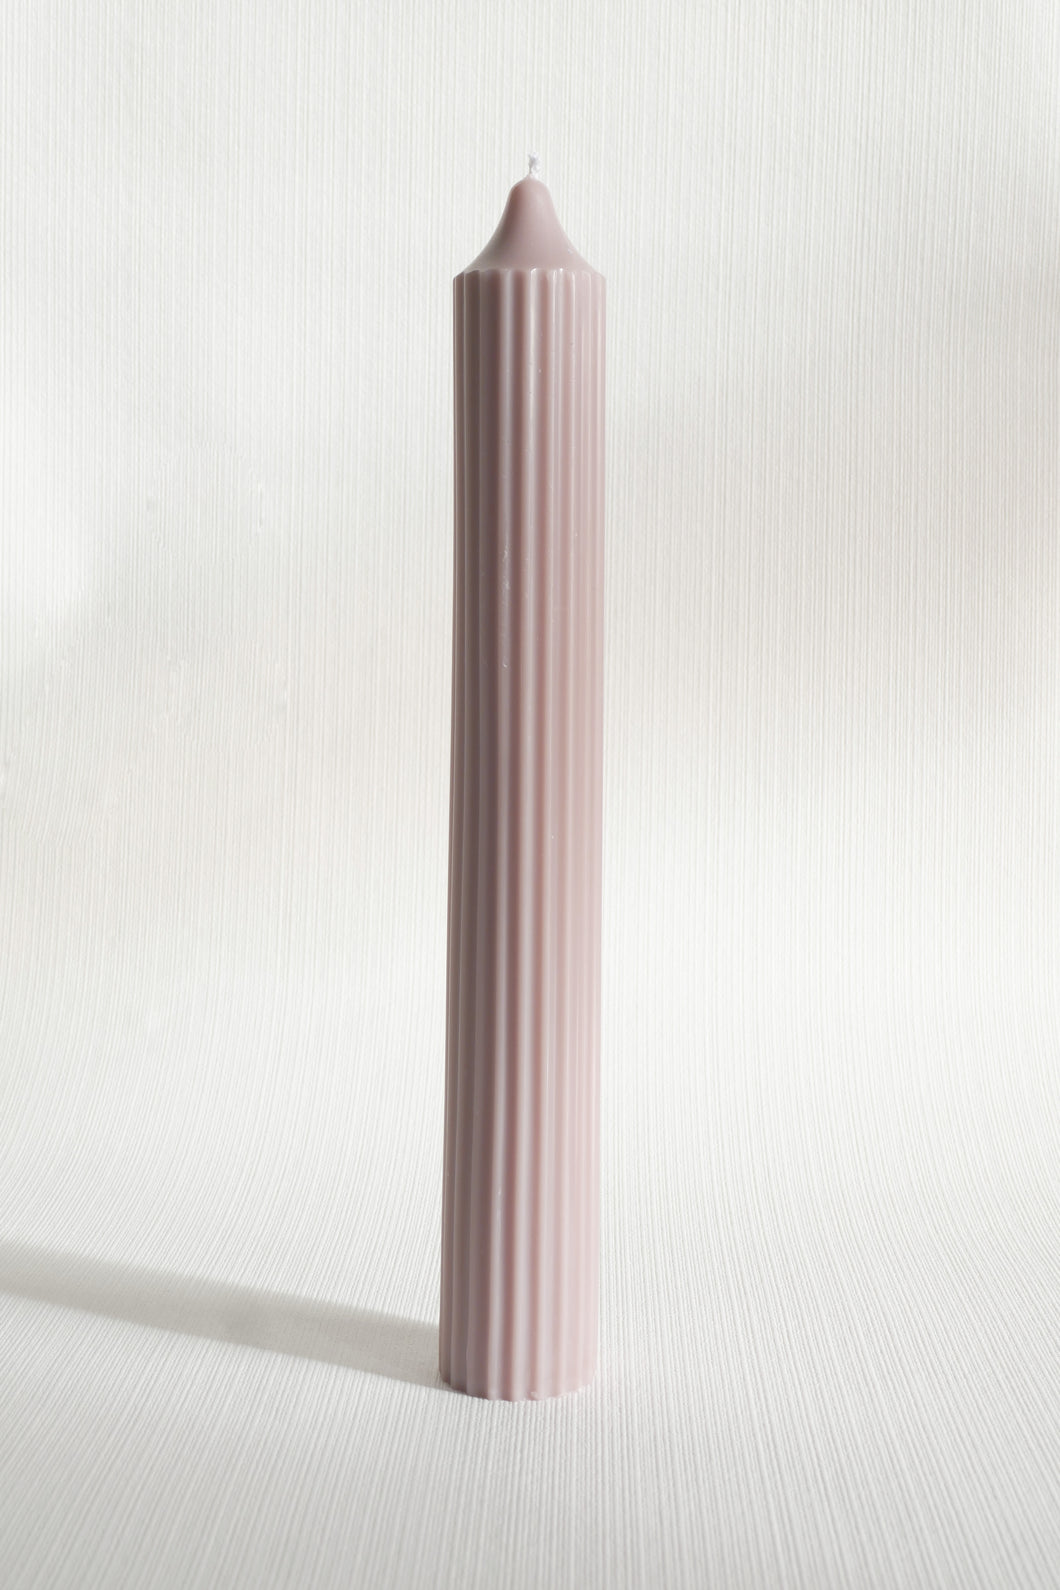 Ribbed Pillar Candle - Taupe